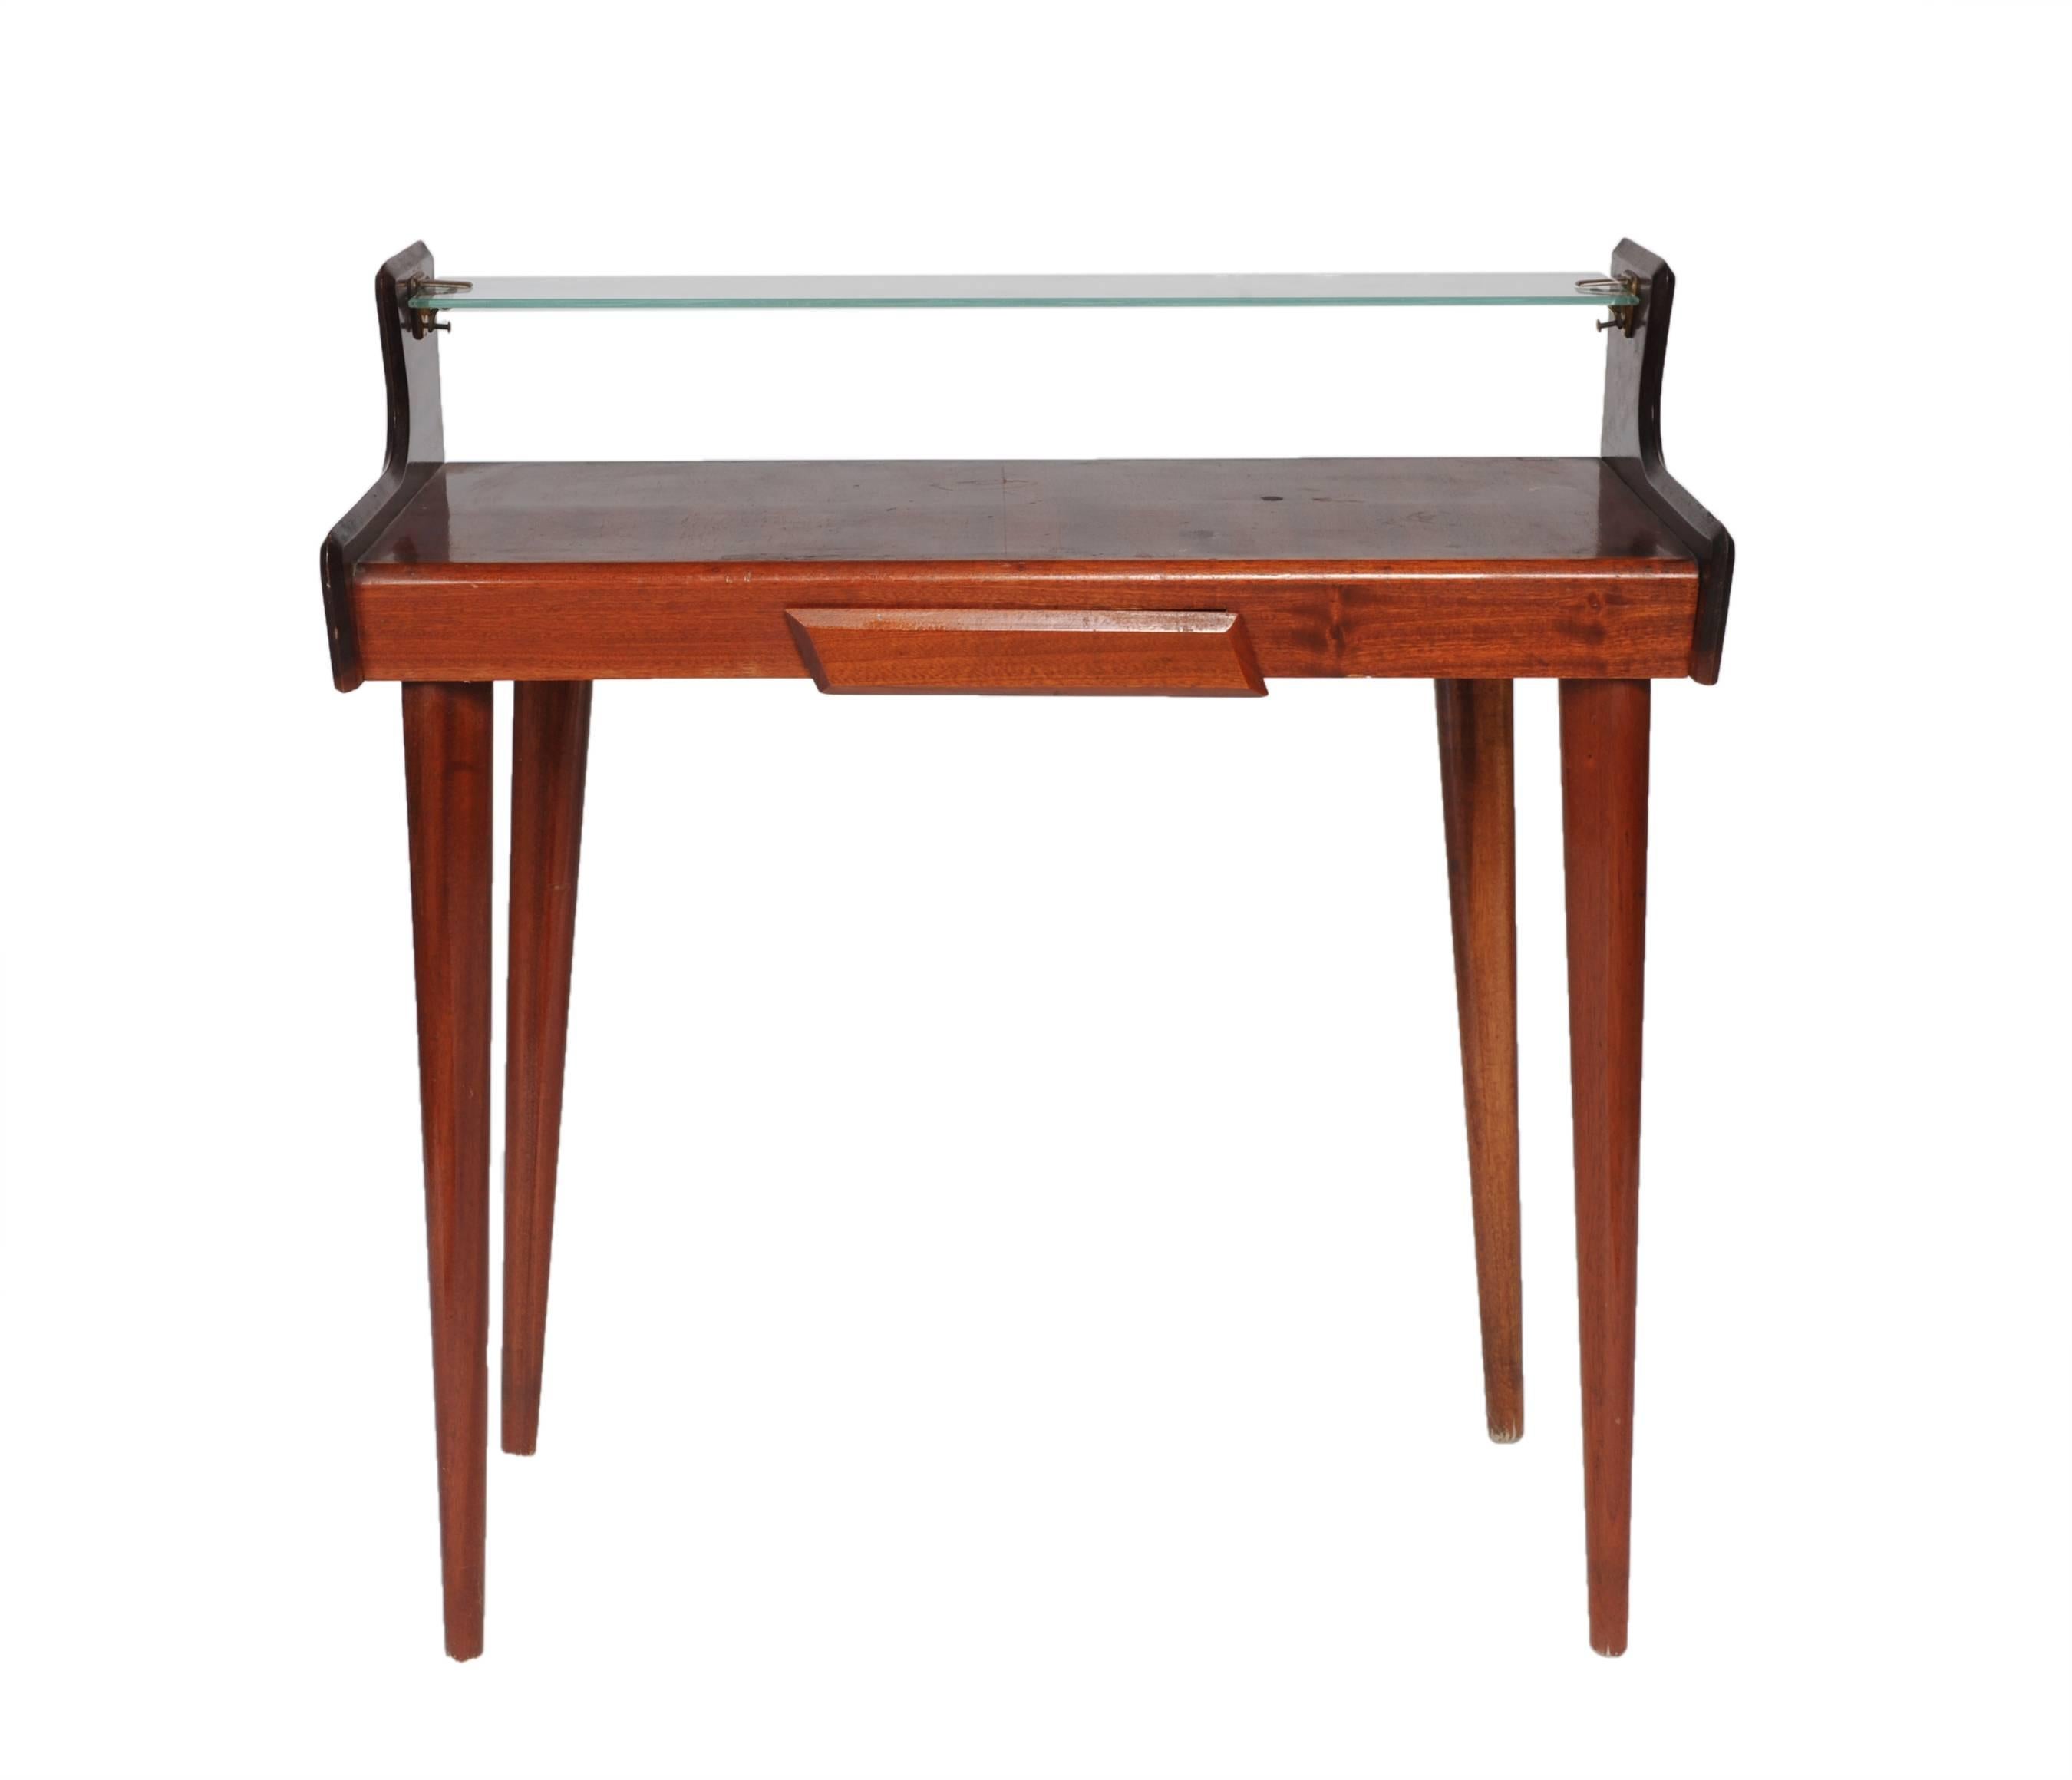 A splendid example of linear style typical of Italian design in the 1950s and 1960s.
Mahogany console in excellent condition, suitable for any environment; essential and elegant in its simplicity.
We can restore and polish this console with a modest